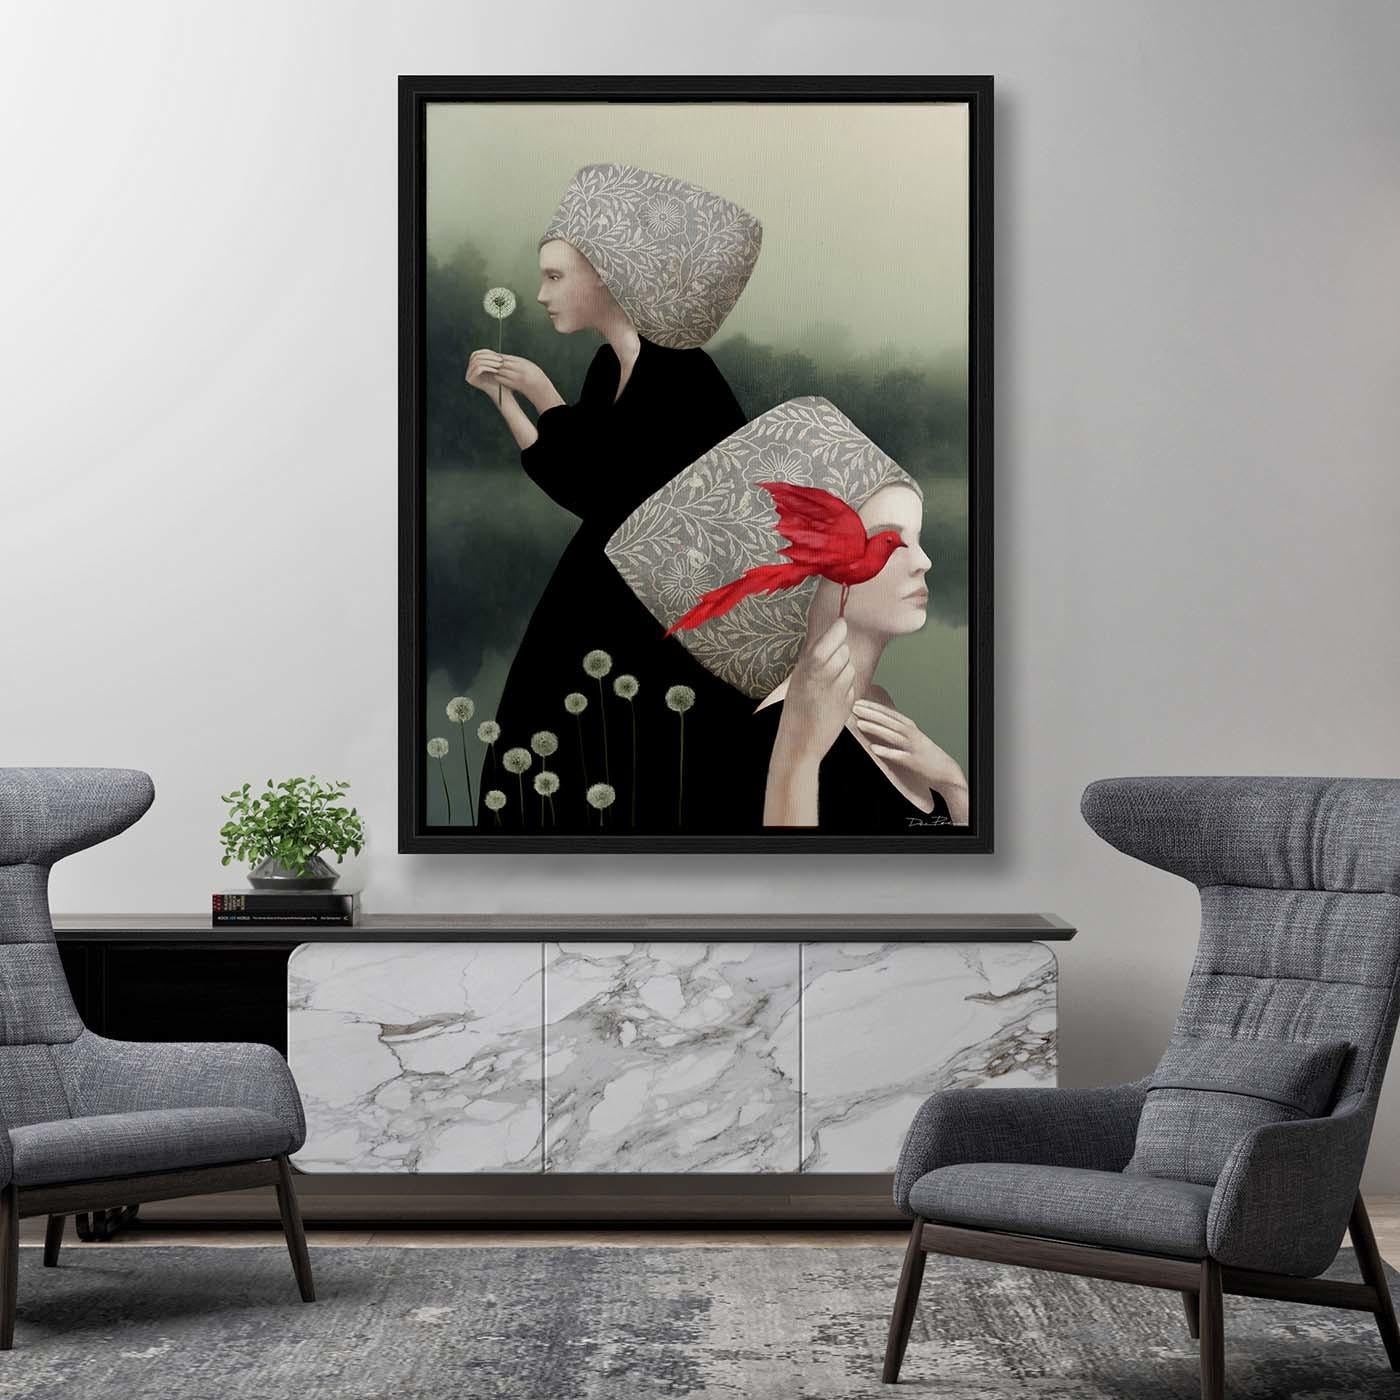 Painted in a Pop-Surrealist style, this digital painting depicts two women on the misty shores of a lake. Adorned in elegant, unusual head coverings, one holds a dandelion, with the other clings to a stately red bird, representing her otherworldly